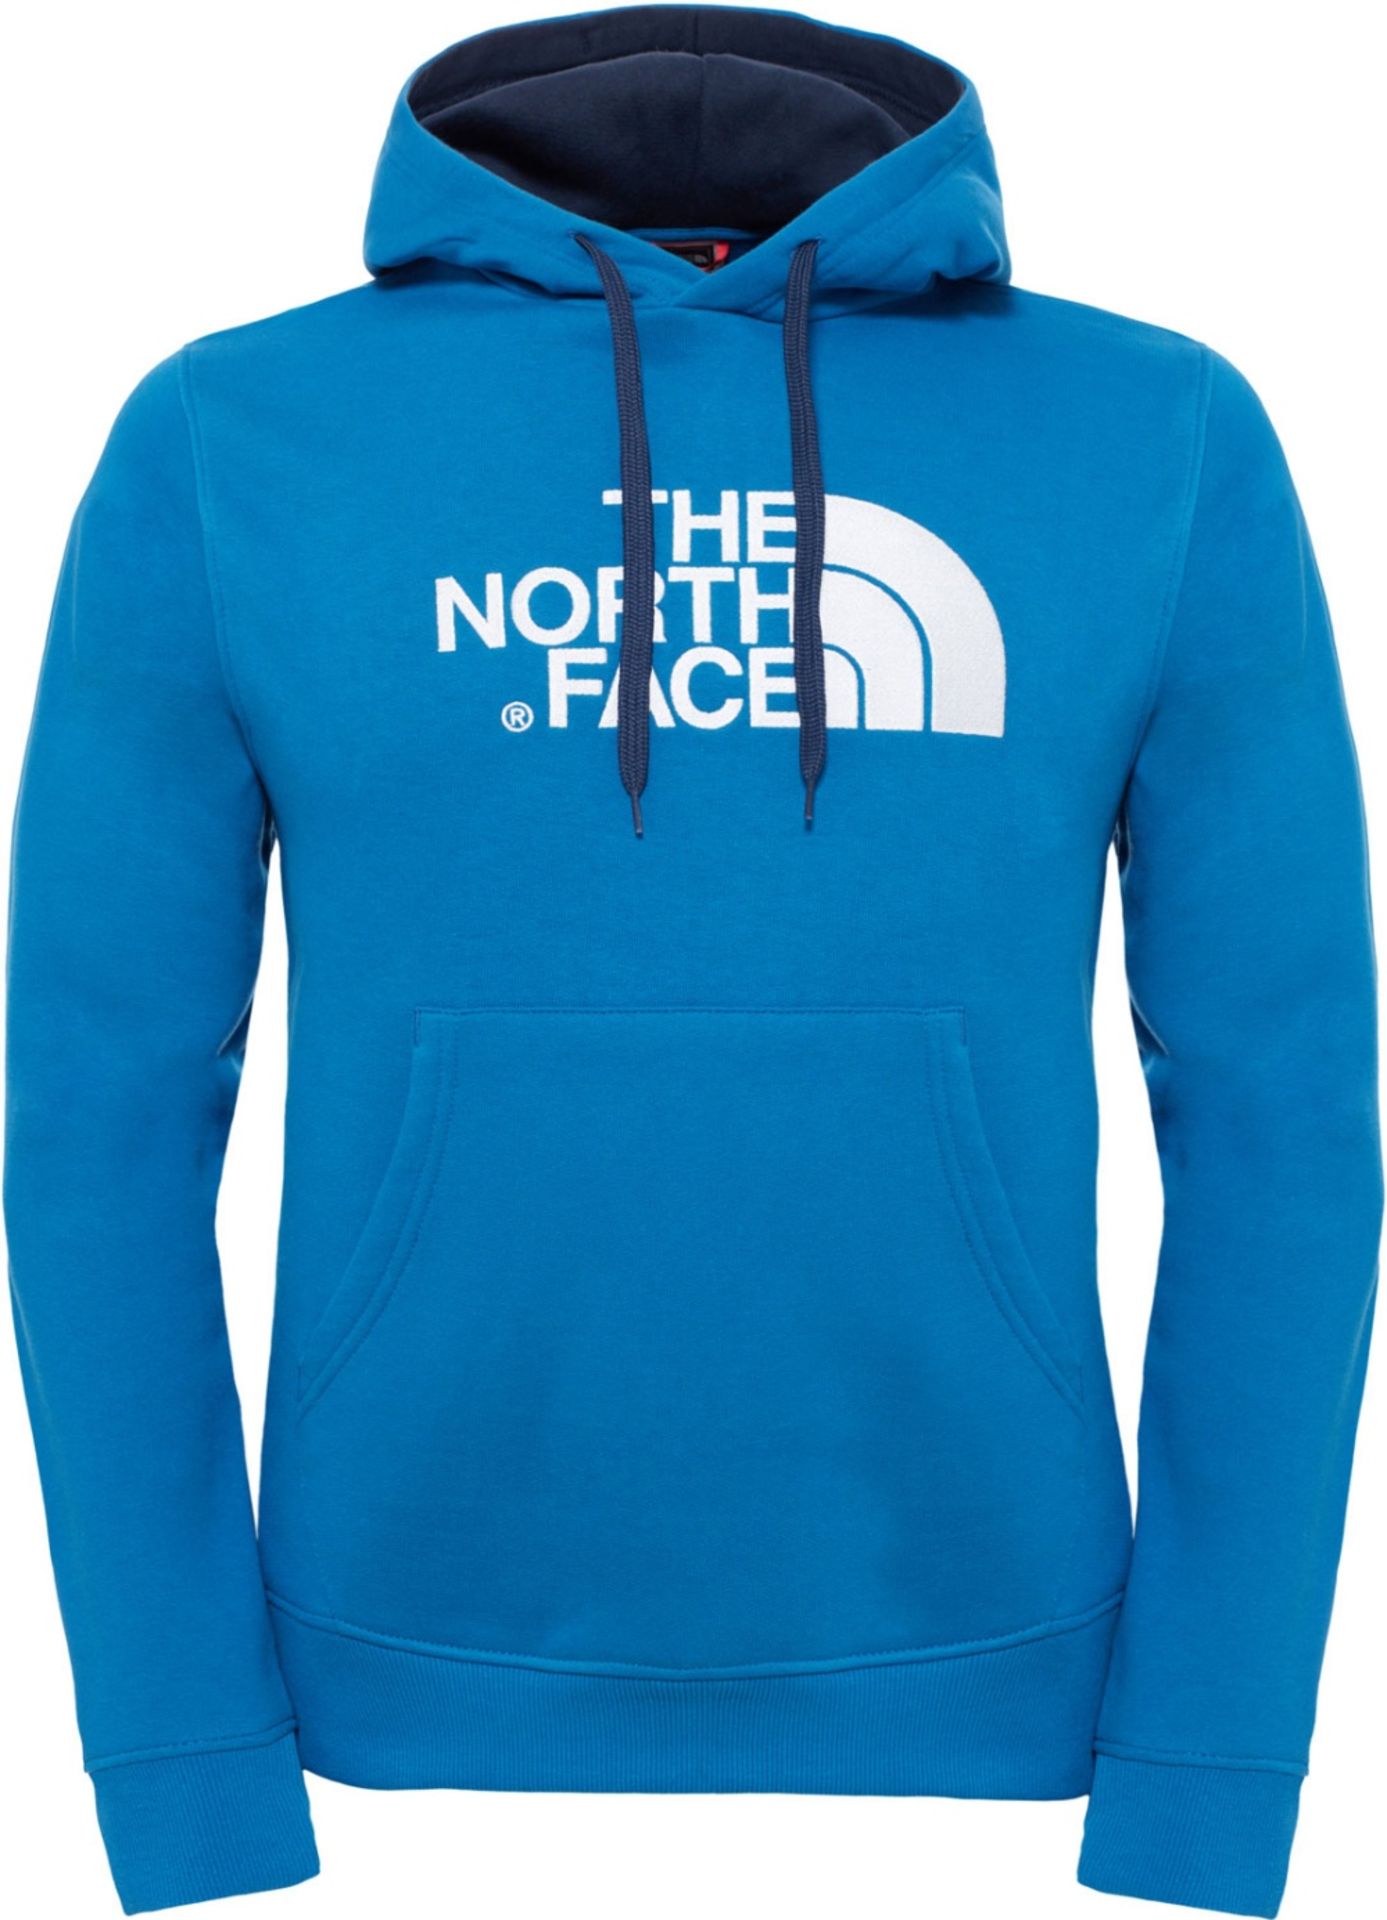 THE NORTH FACE DREW PEAK PULLOVER HOODIE SIZE XXL (DELIVERY BAND A)